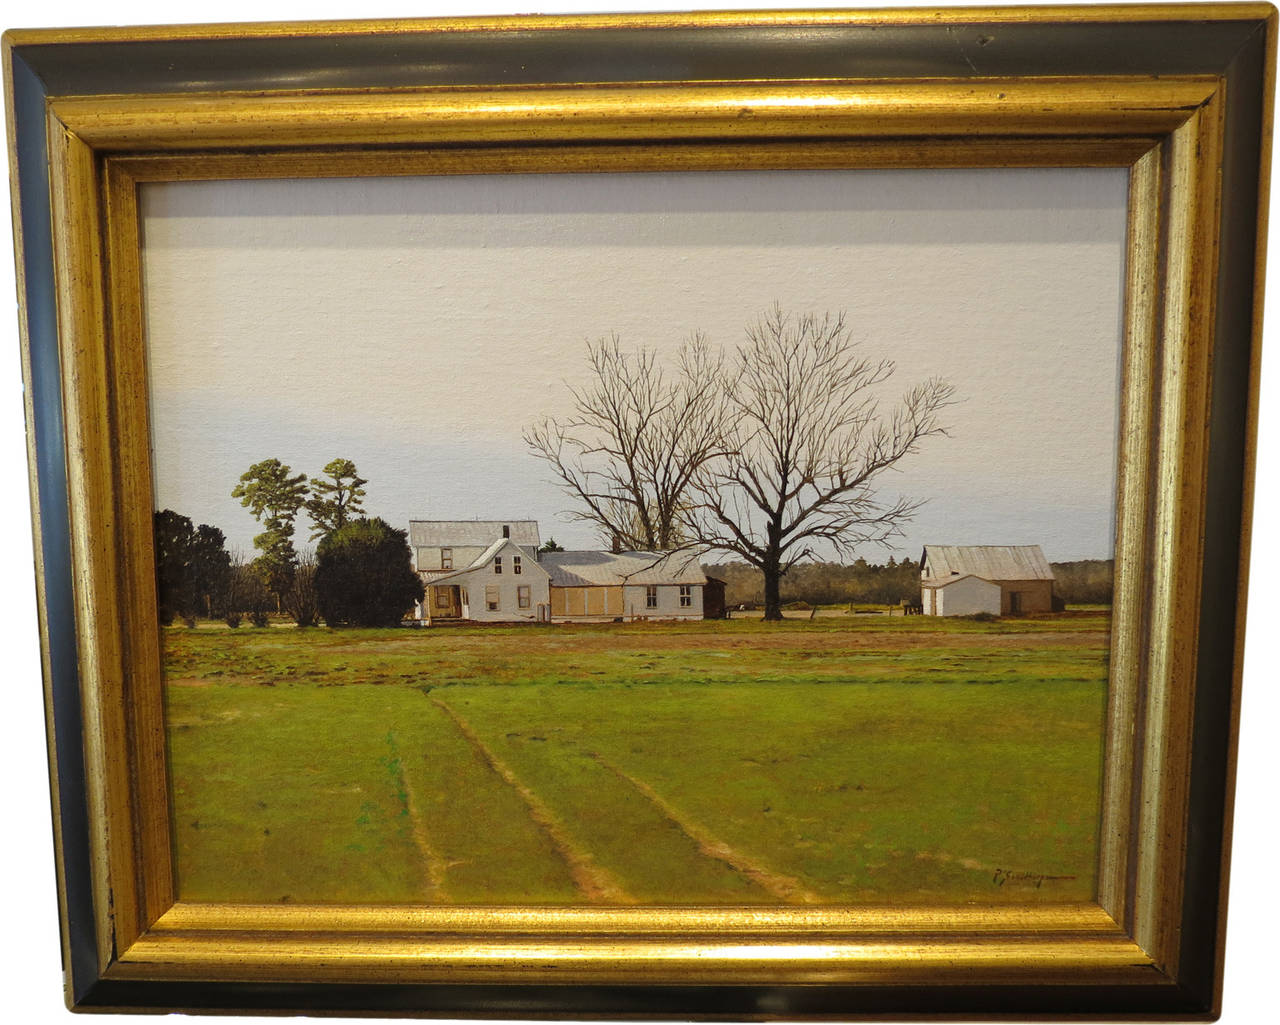 Peter Sculthorpe Landscape Painting - "On the Way to Edenton, North Carolina"